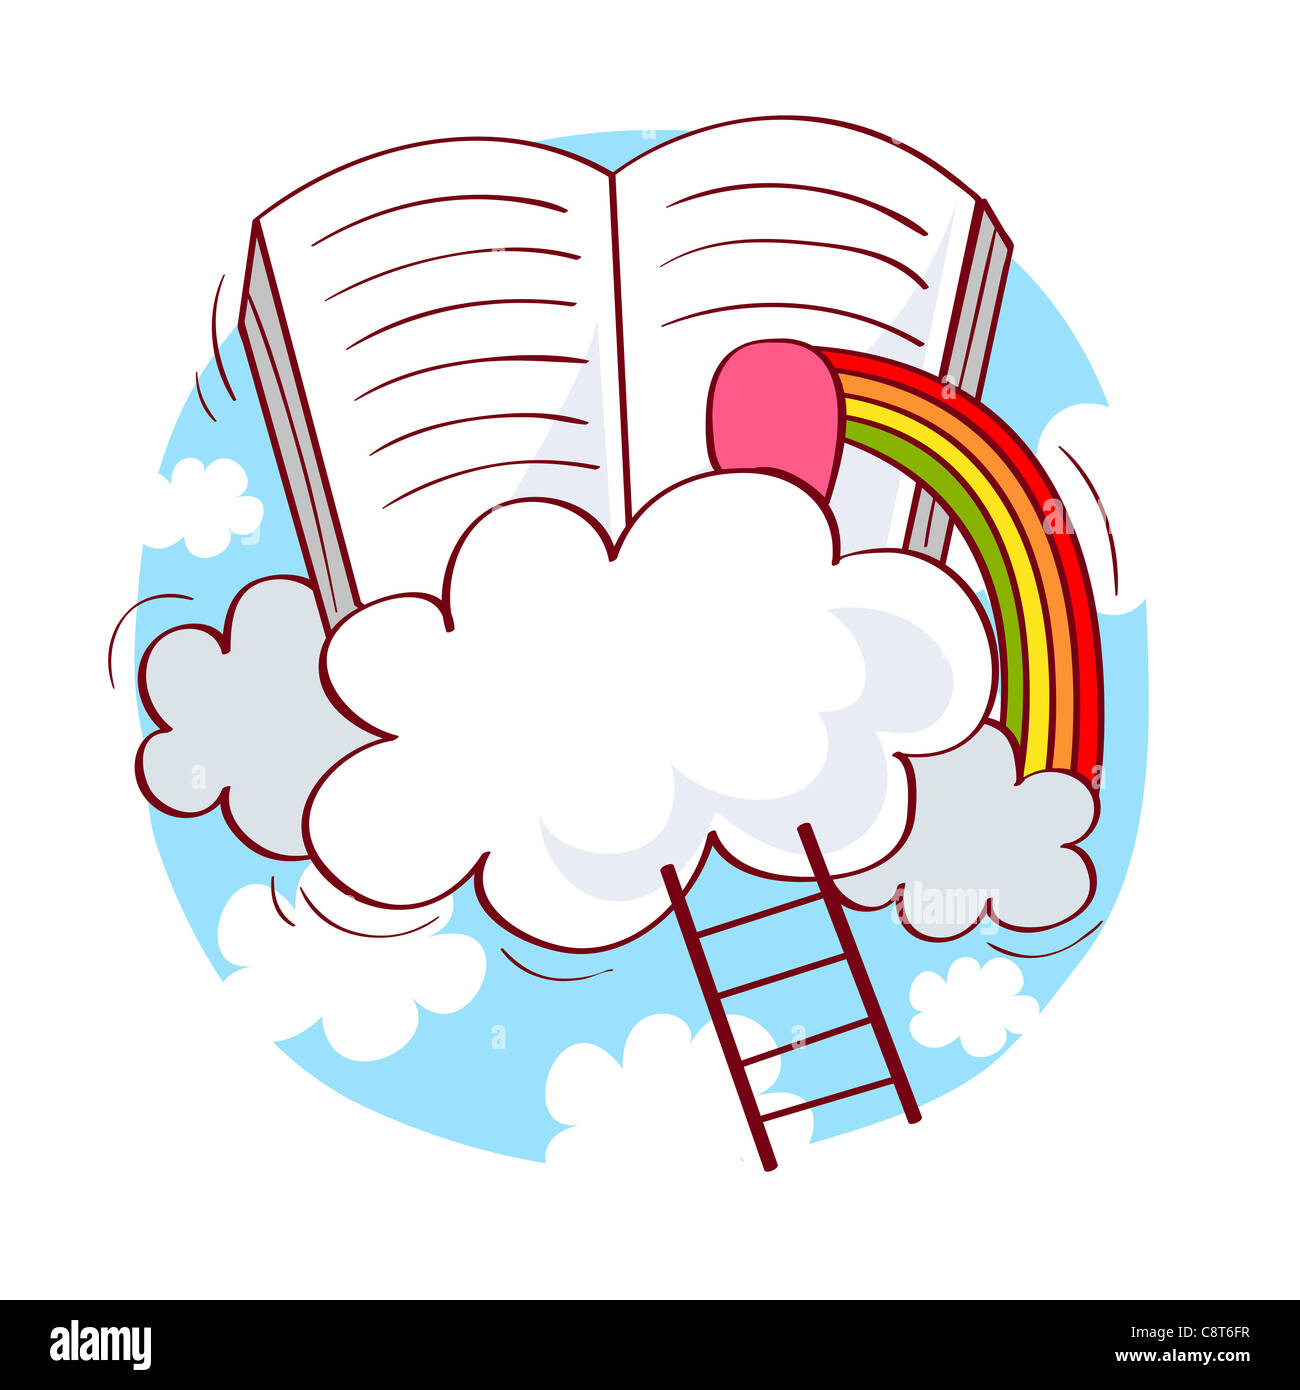 Ladder on clouds with book and rainbow Stock Photo